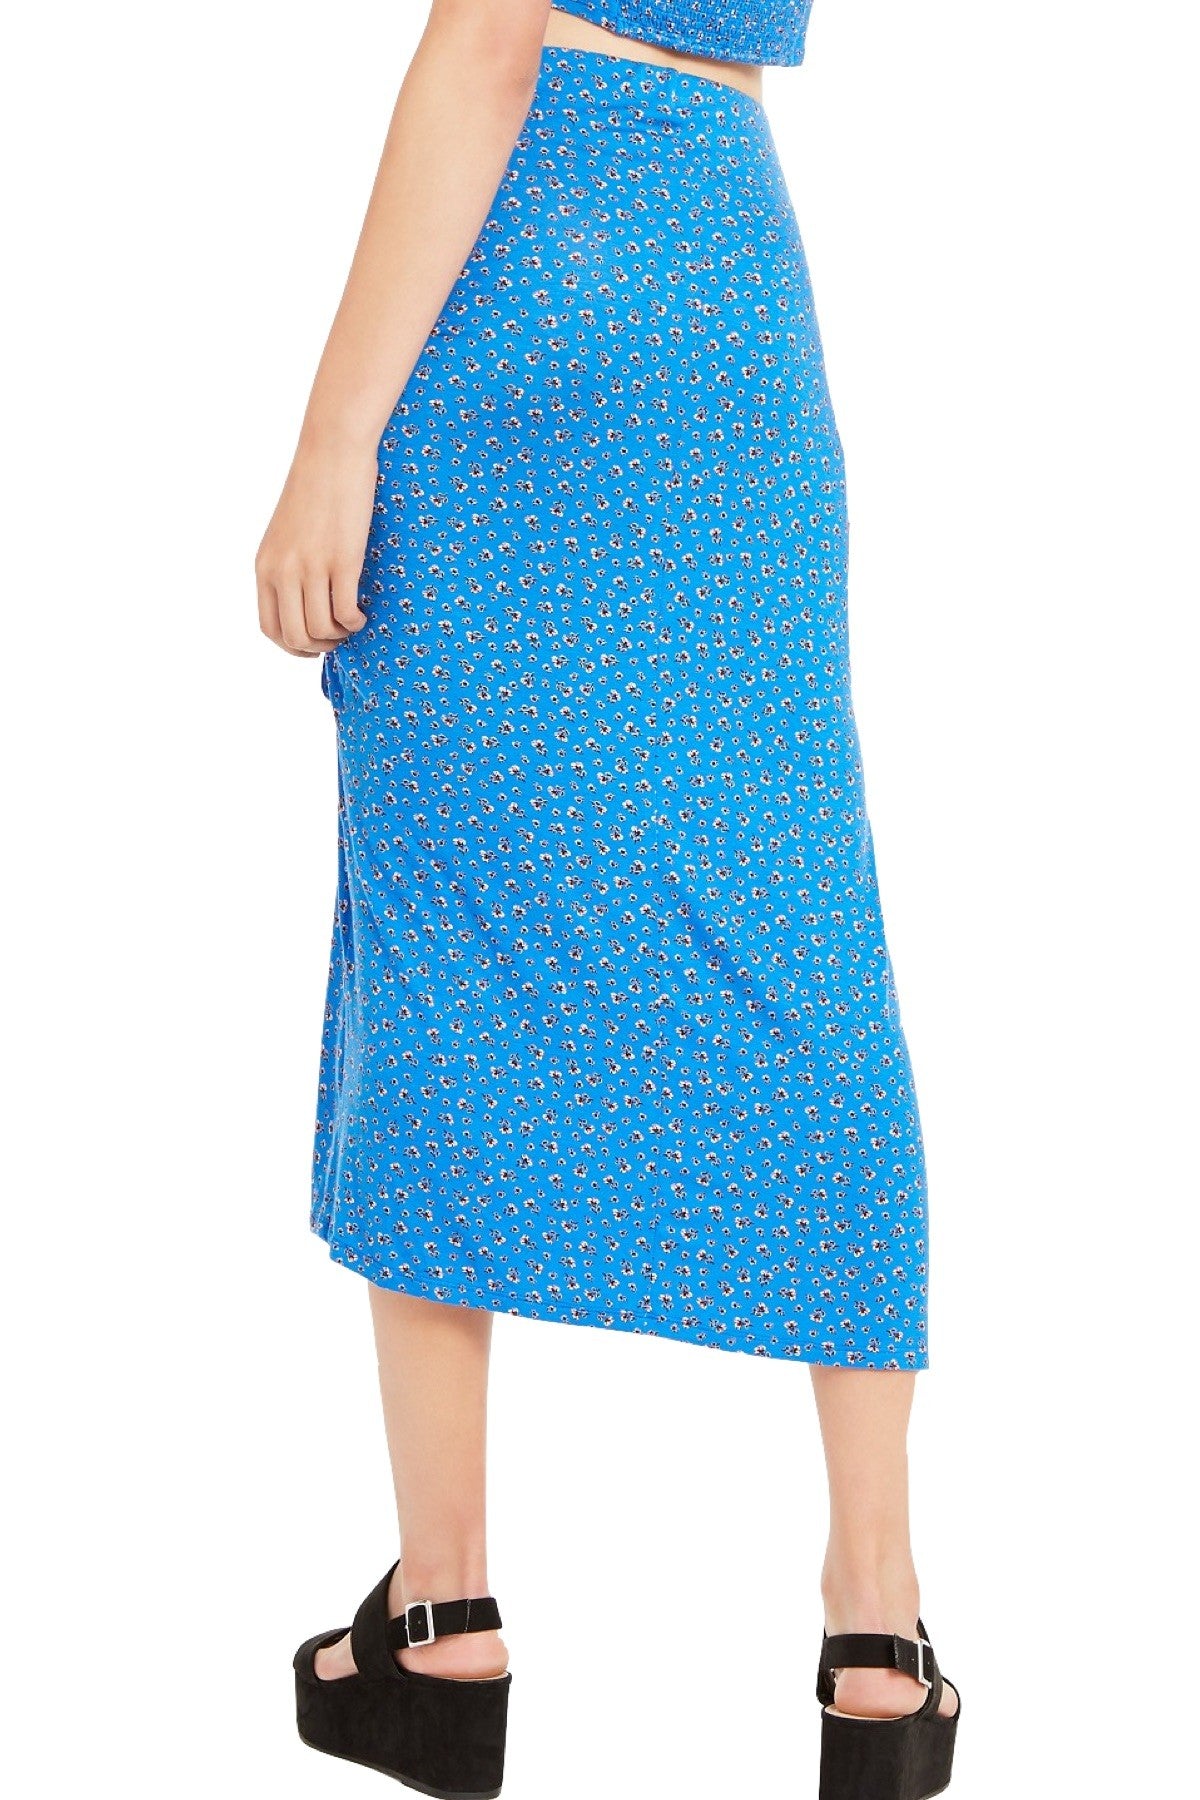 Material Girl Blue Ditsy Printed Junior's Ruched Tie Front Skirt